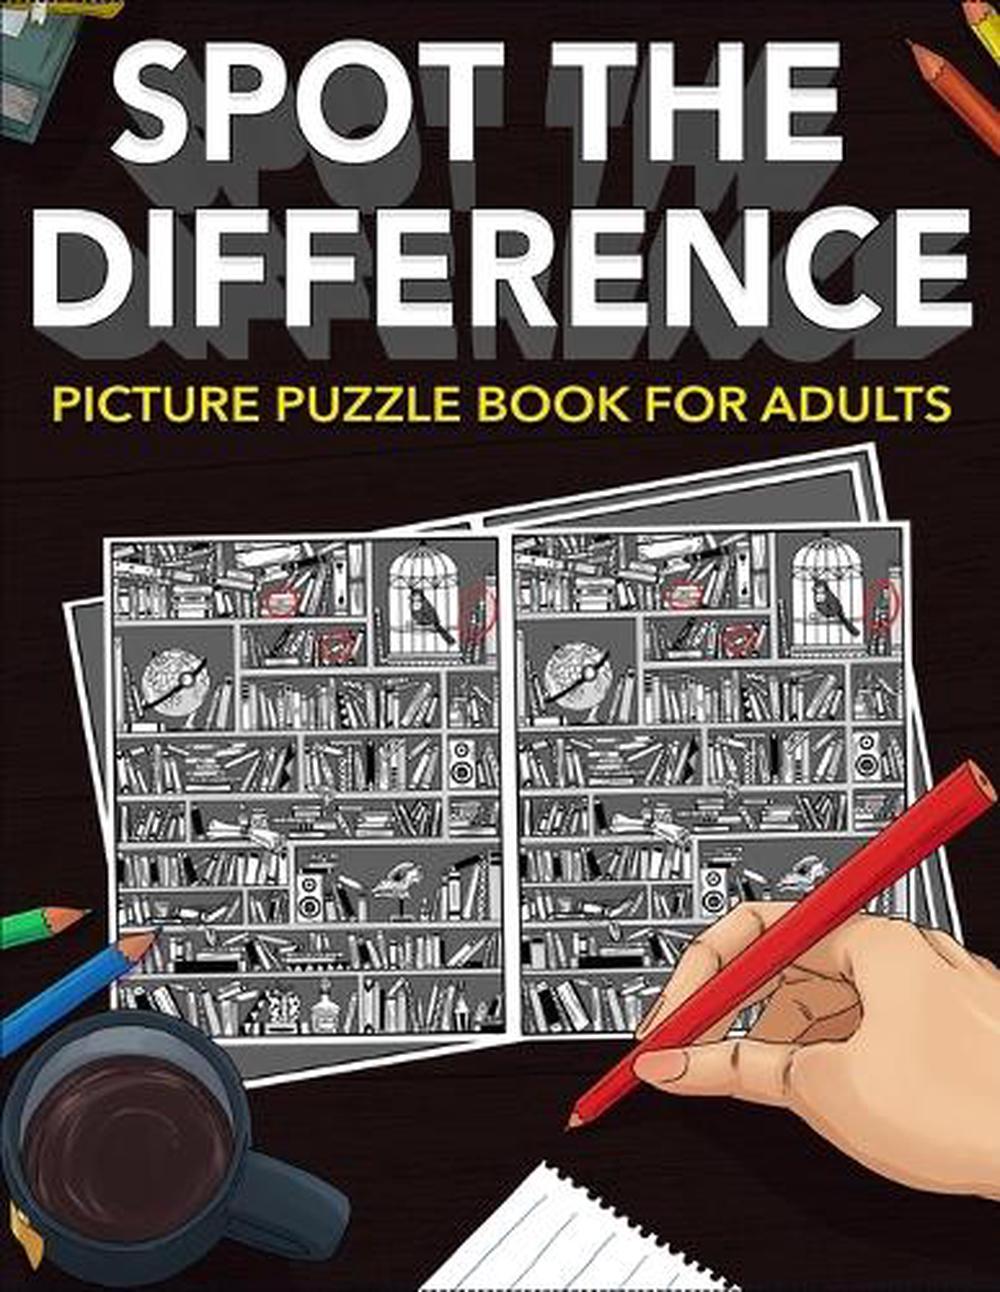 spot-the-difference-picture-puzzle-book-for-adults-by-barton-press